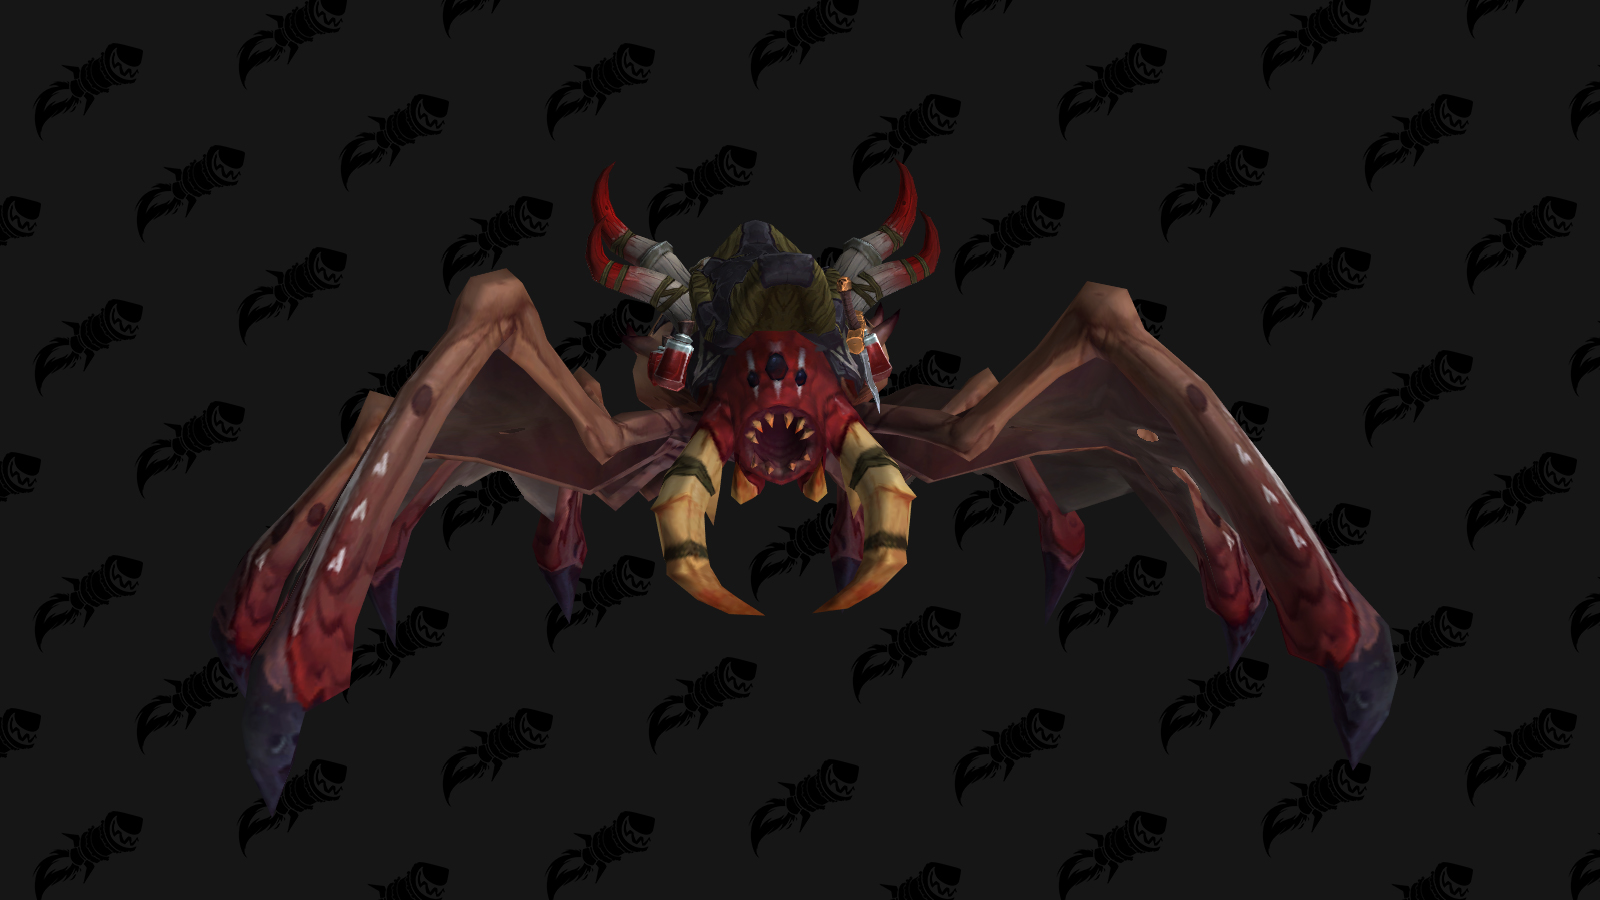 Reins of a Tamed Bloodfeaster dans Battle for Azeroth